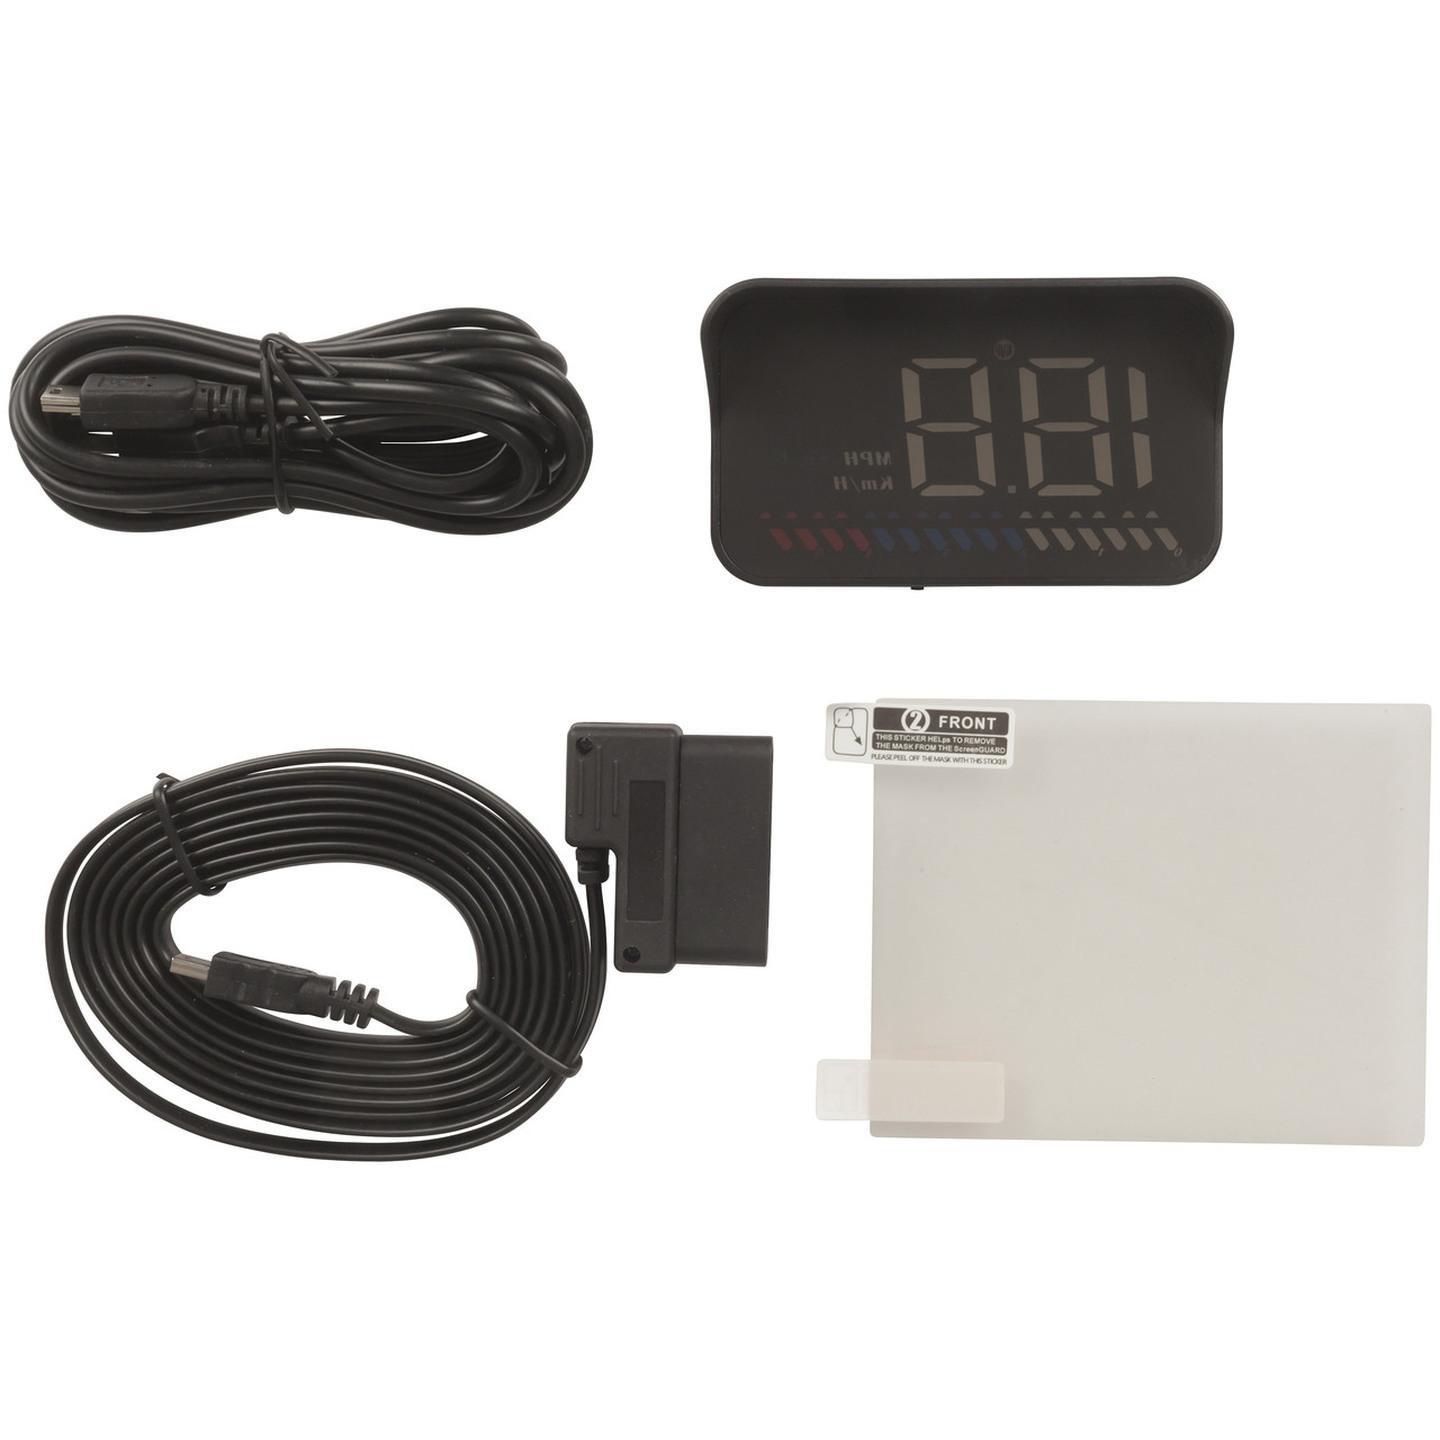 GPS Speedometer Head Up Display with OBDII Data